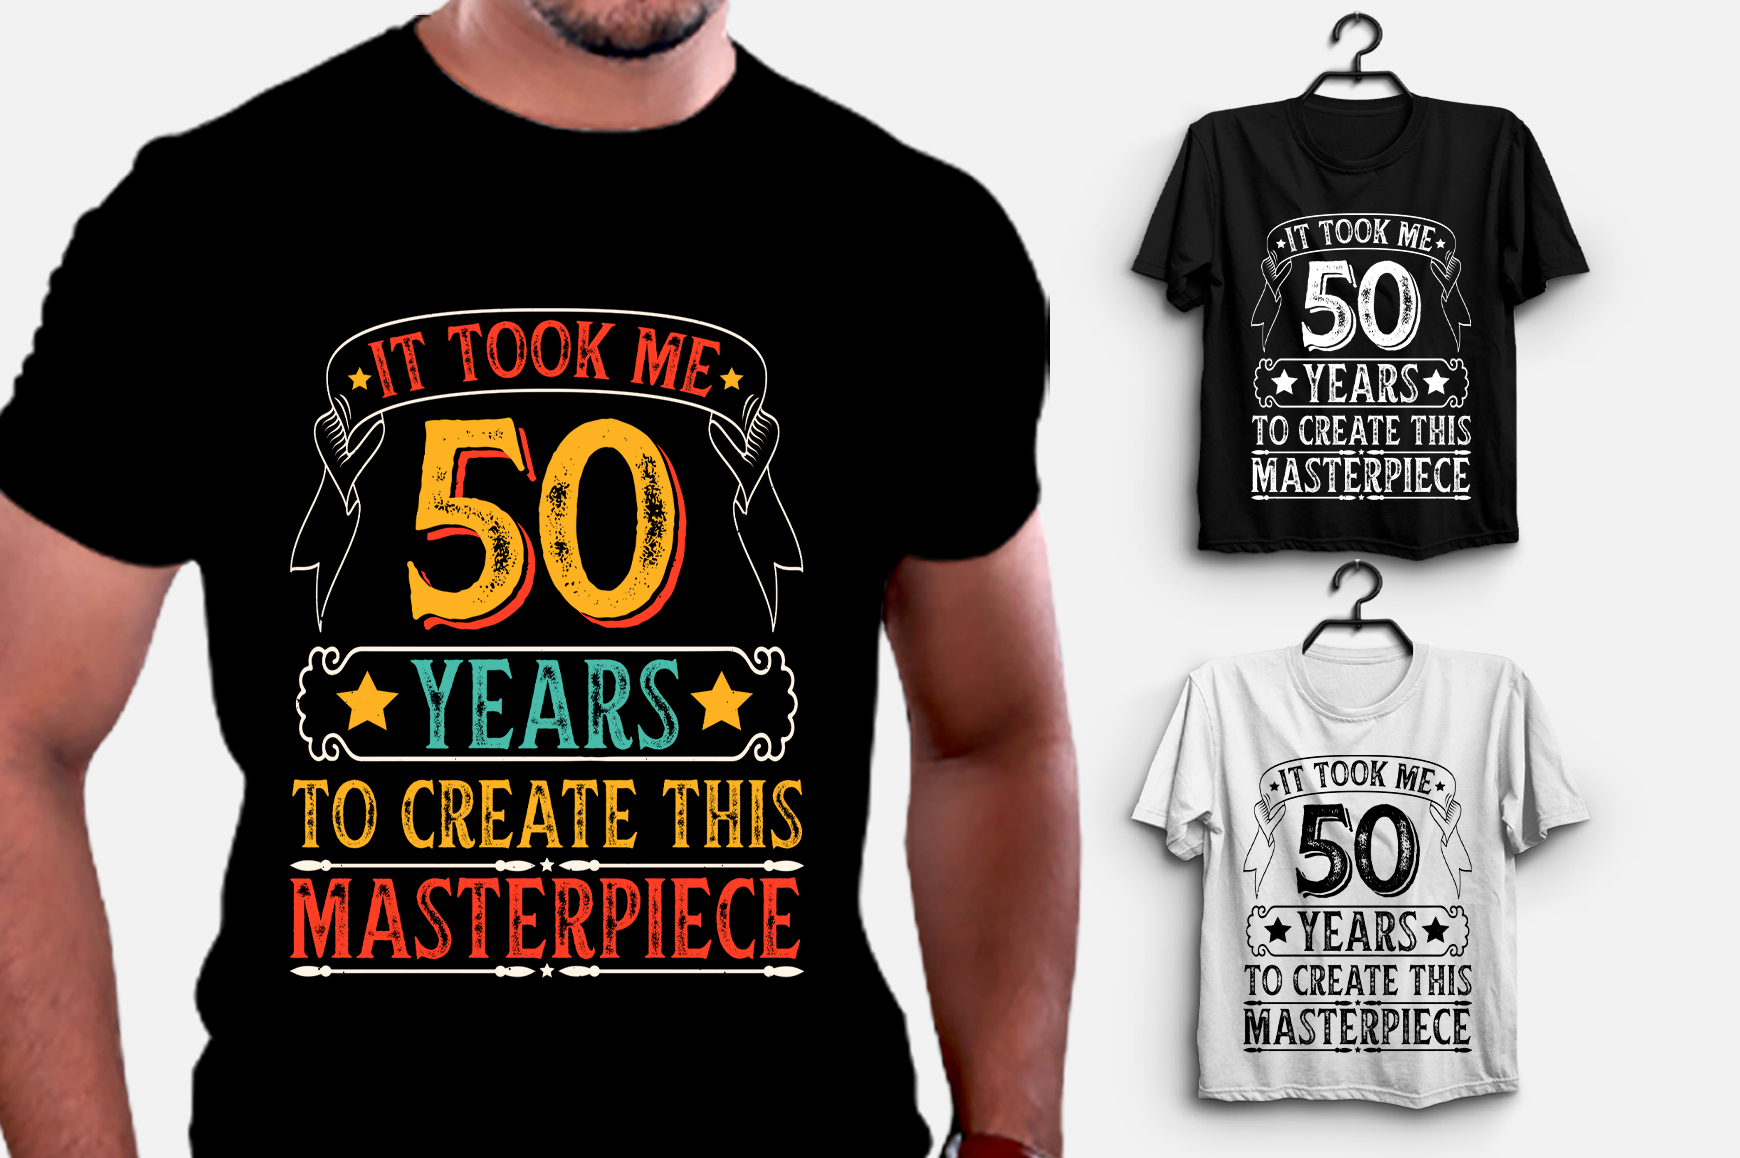 It Took Me 50 Years To Create This Masterpiece T-Shirt Design - Buy t ...